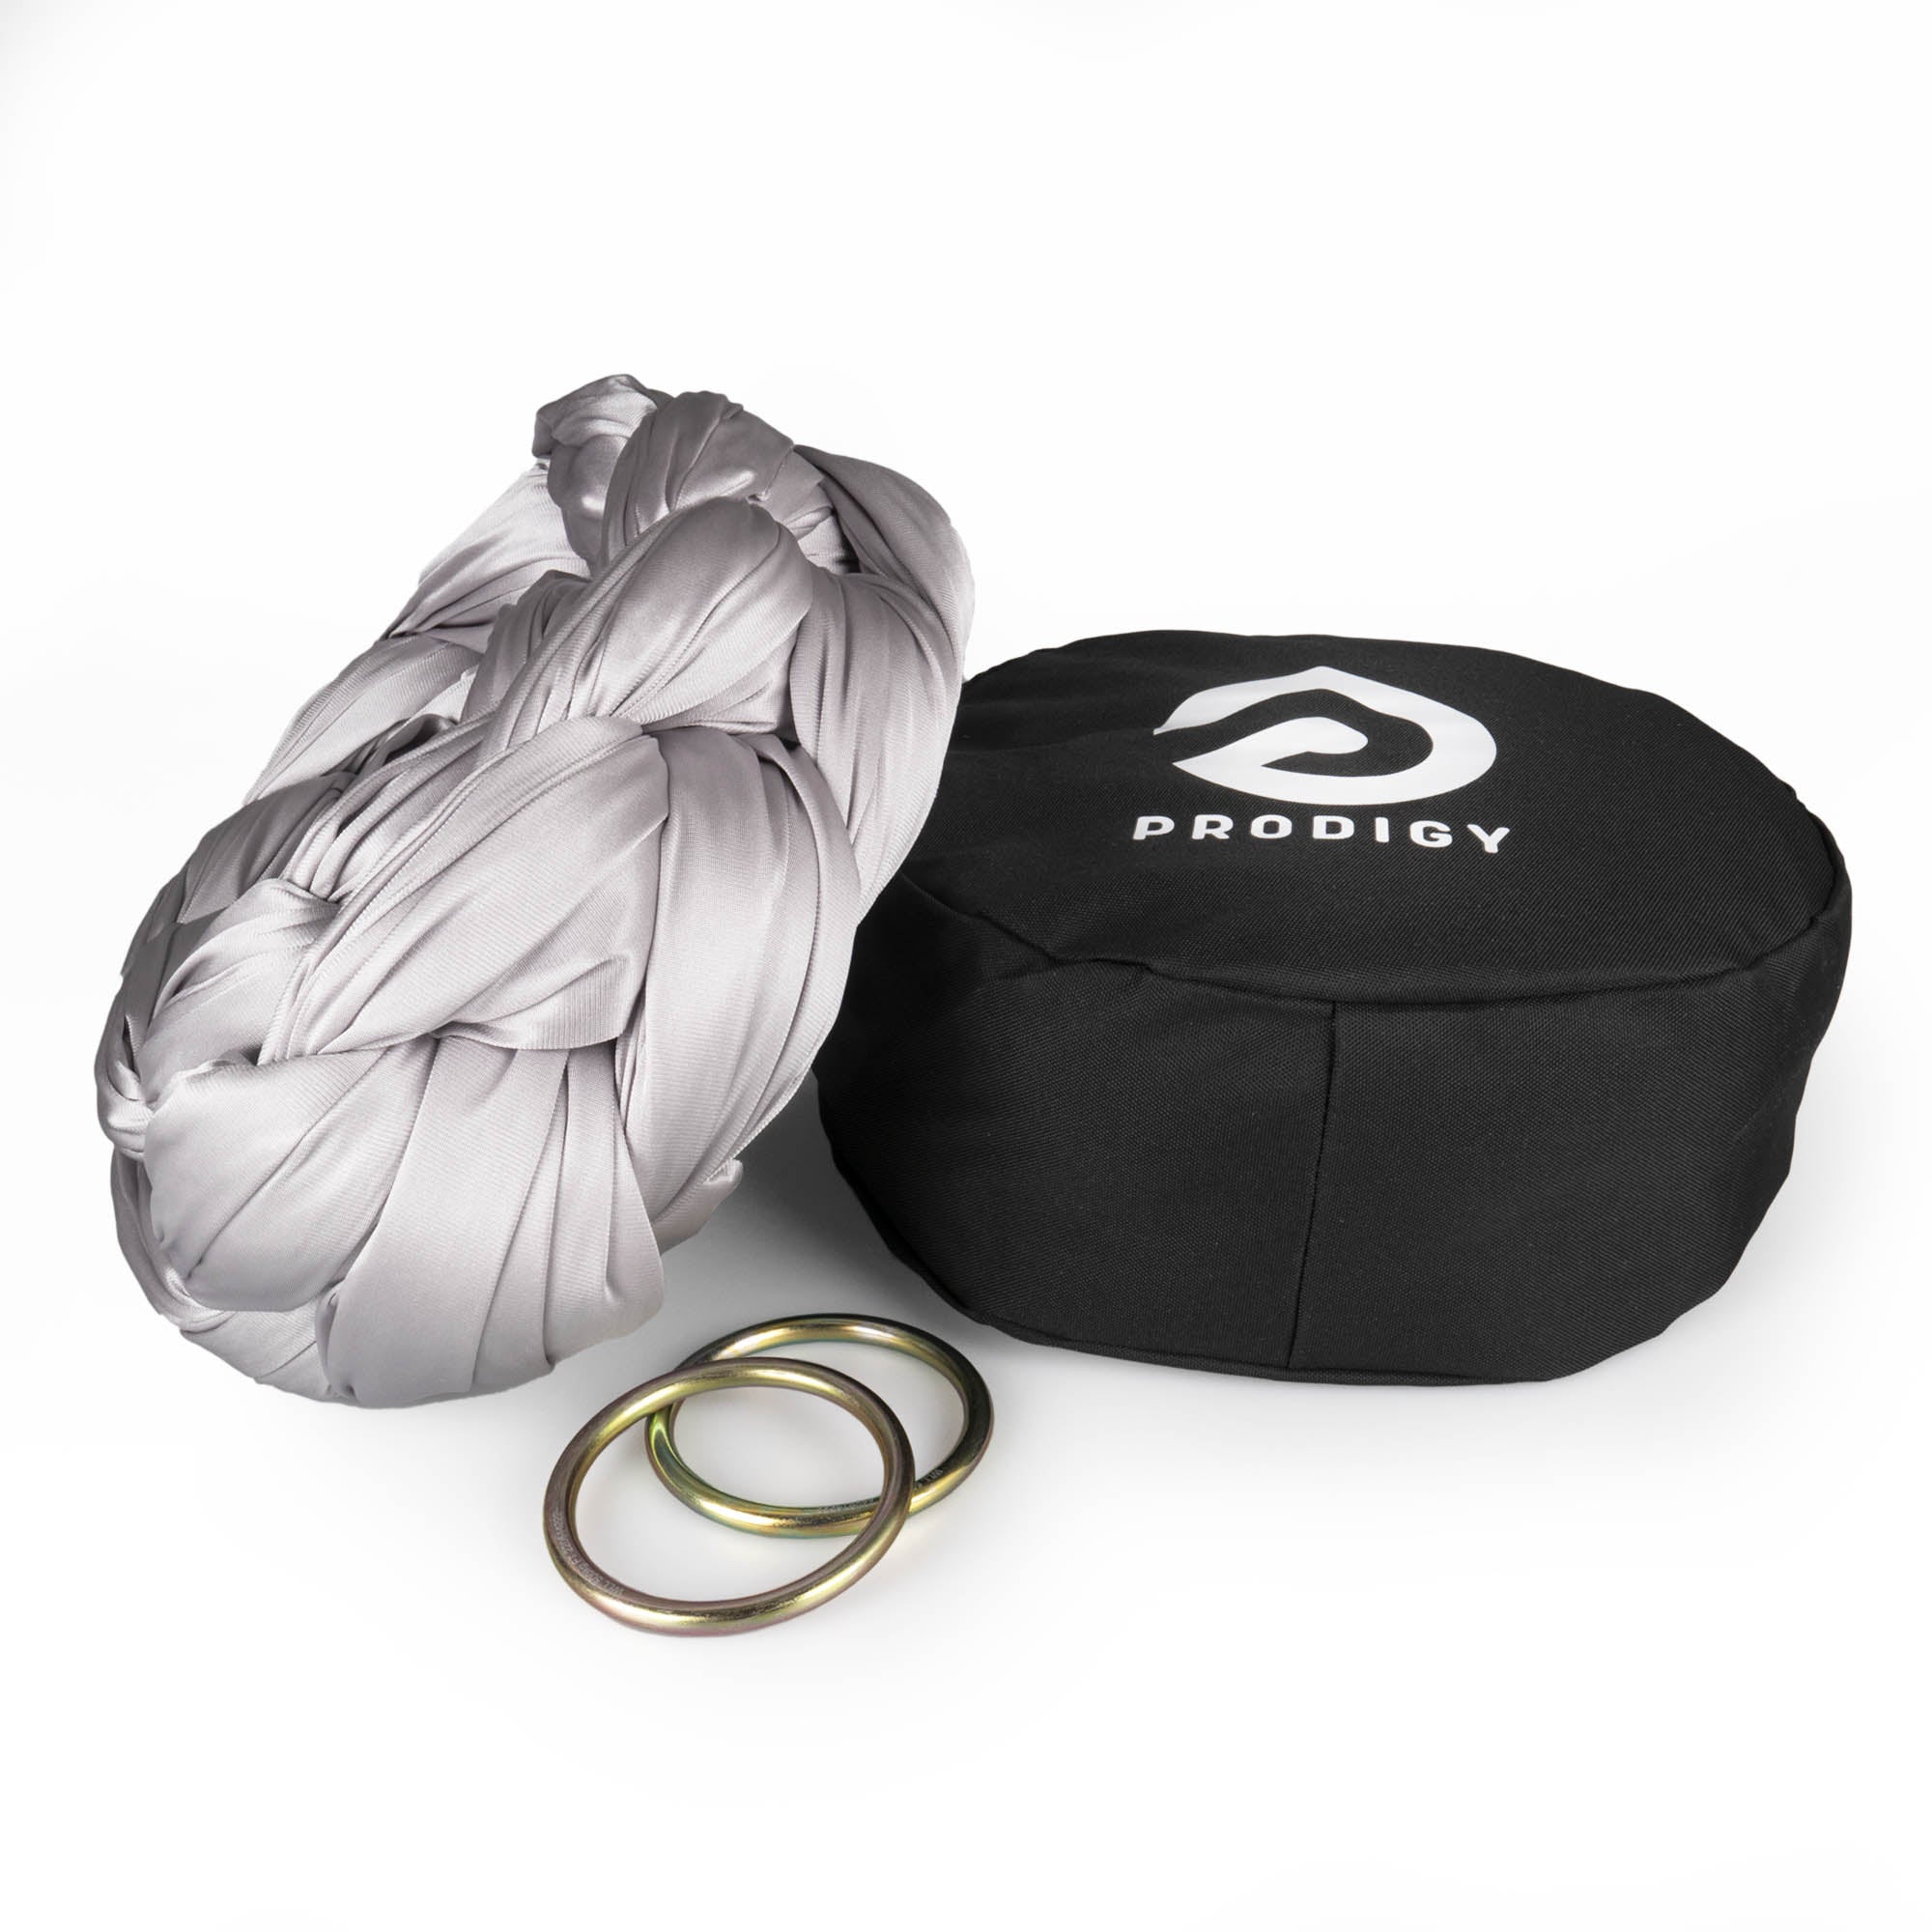 Prodigy 6m silver aerial yoga hammock resting on hammock bag with the rings